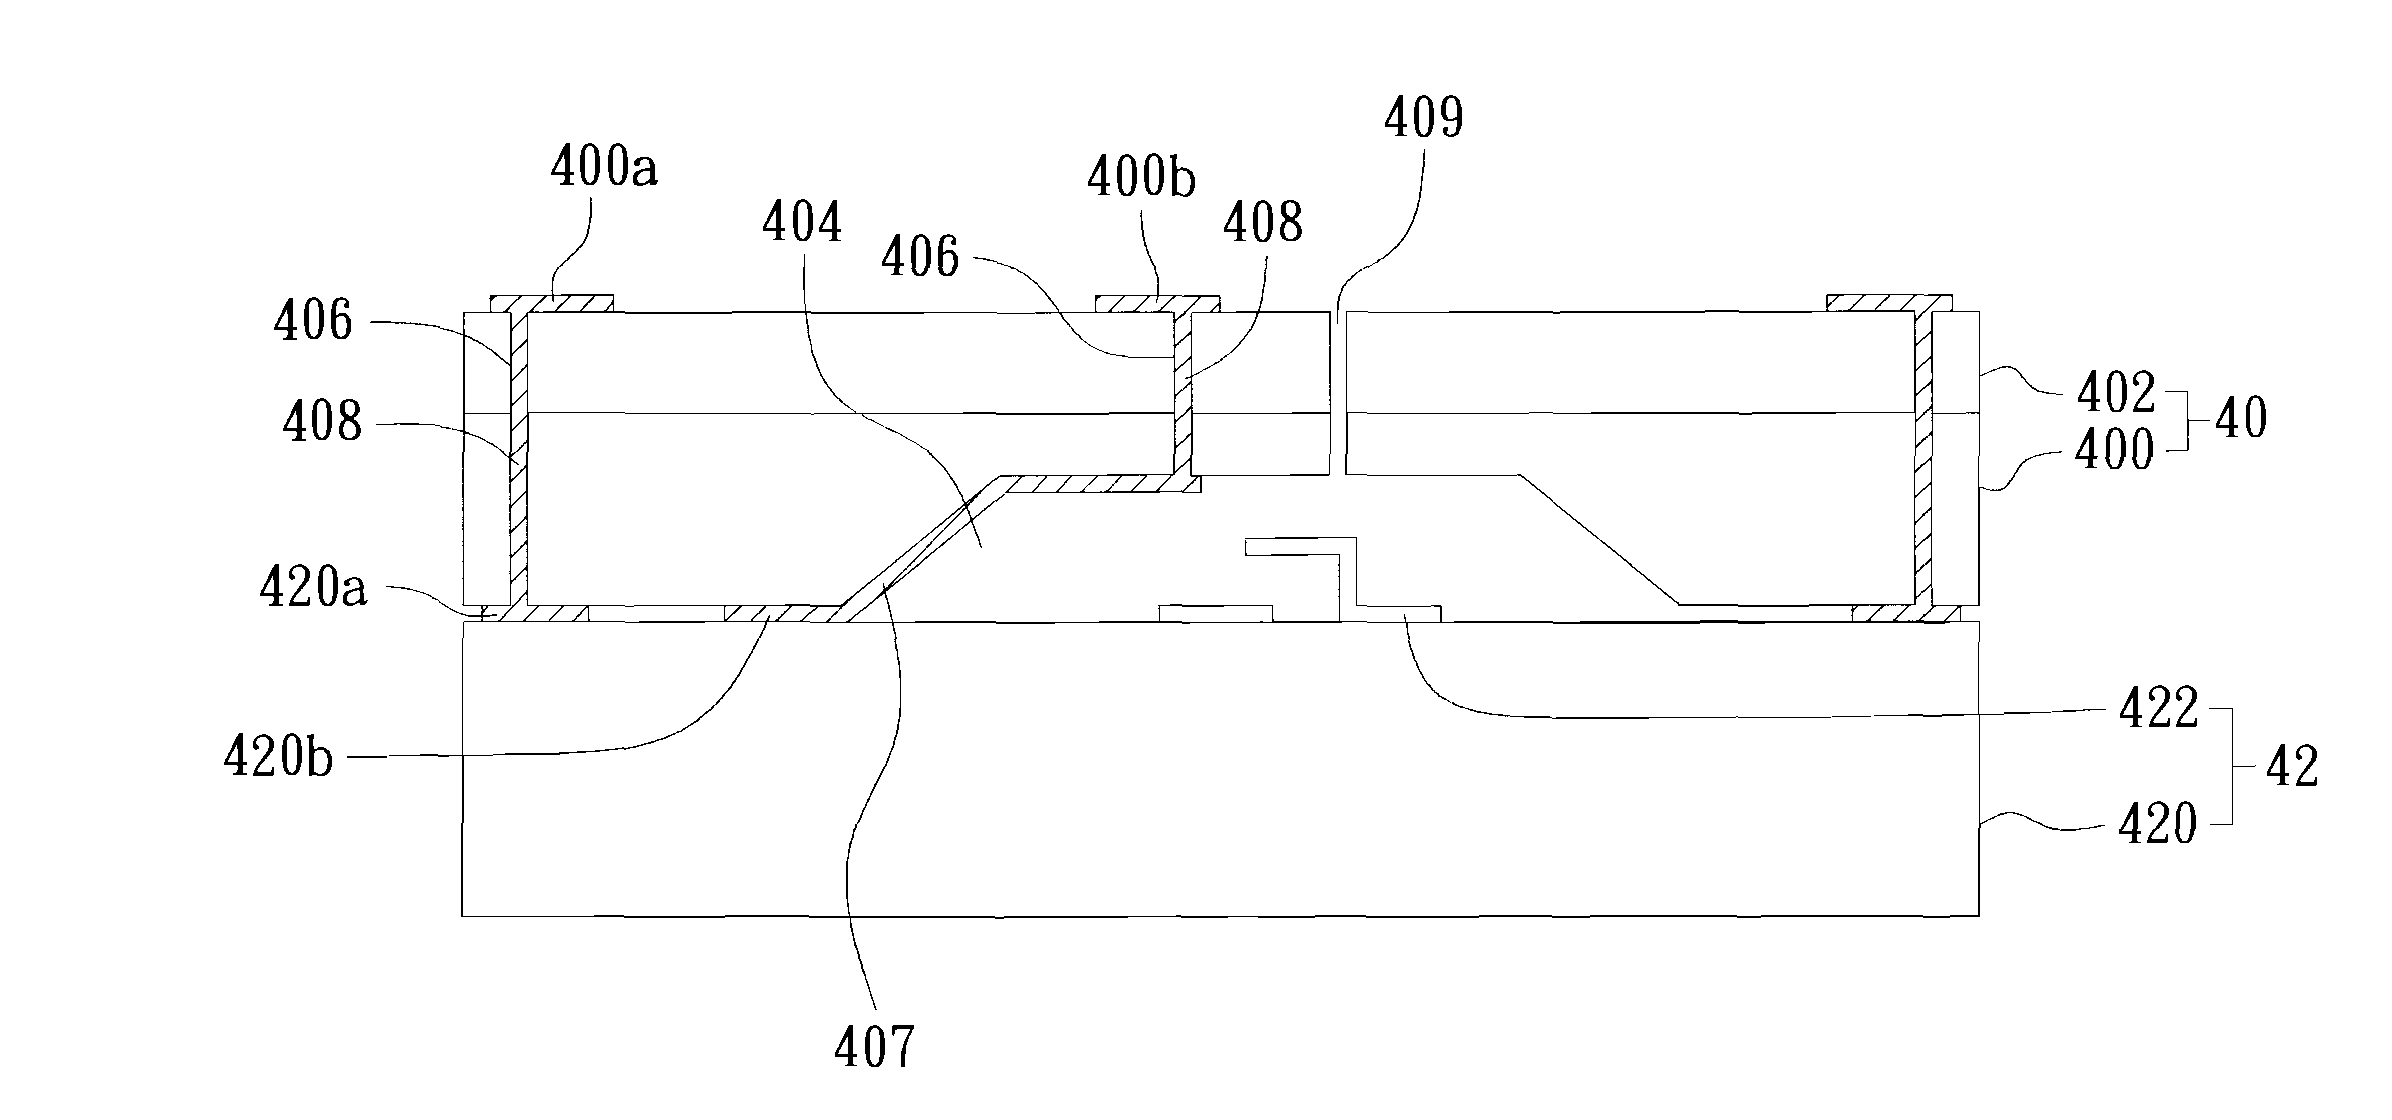 Packaging structure for integration of microelectronics and MEMS devices by 3D stacking and method for manufacturing the same